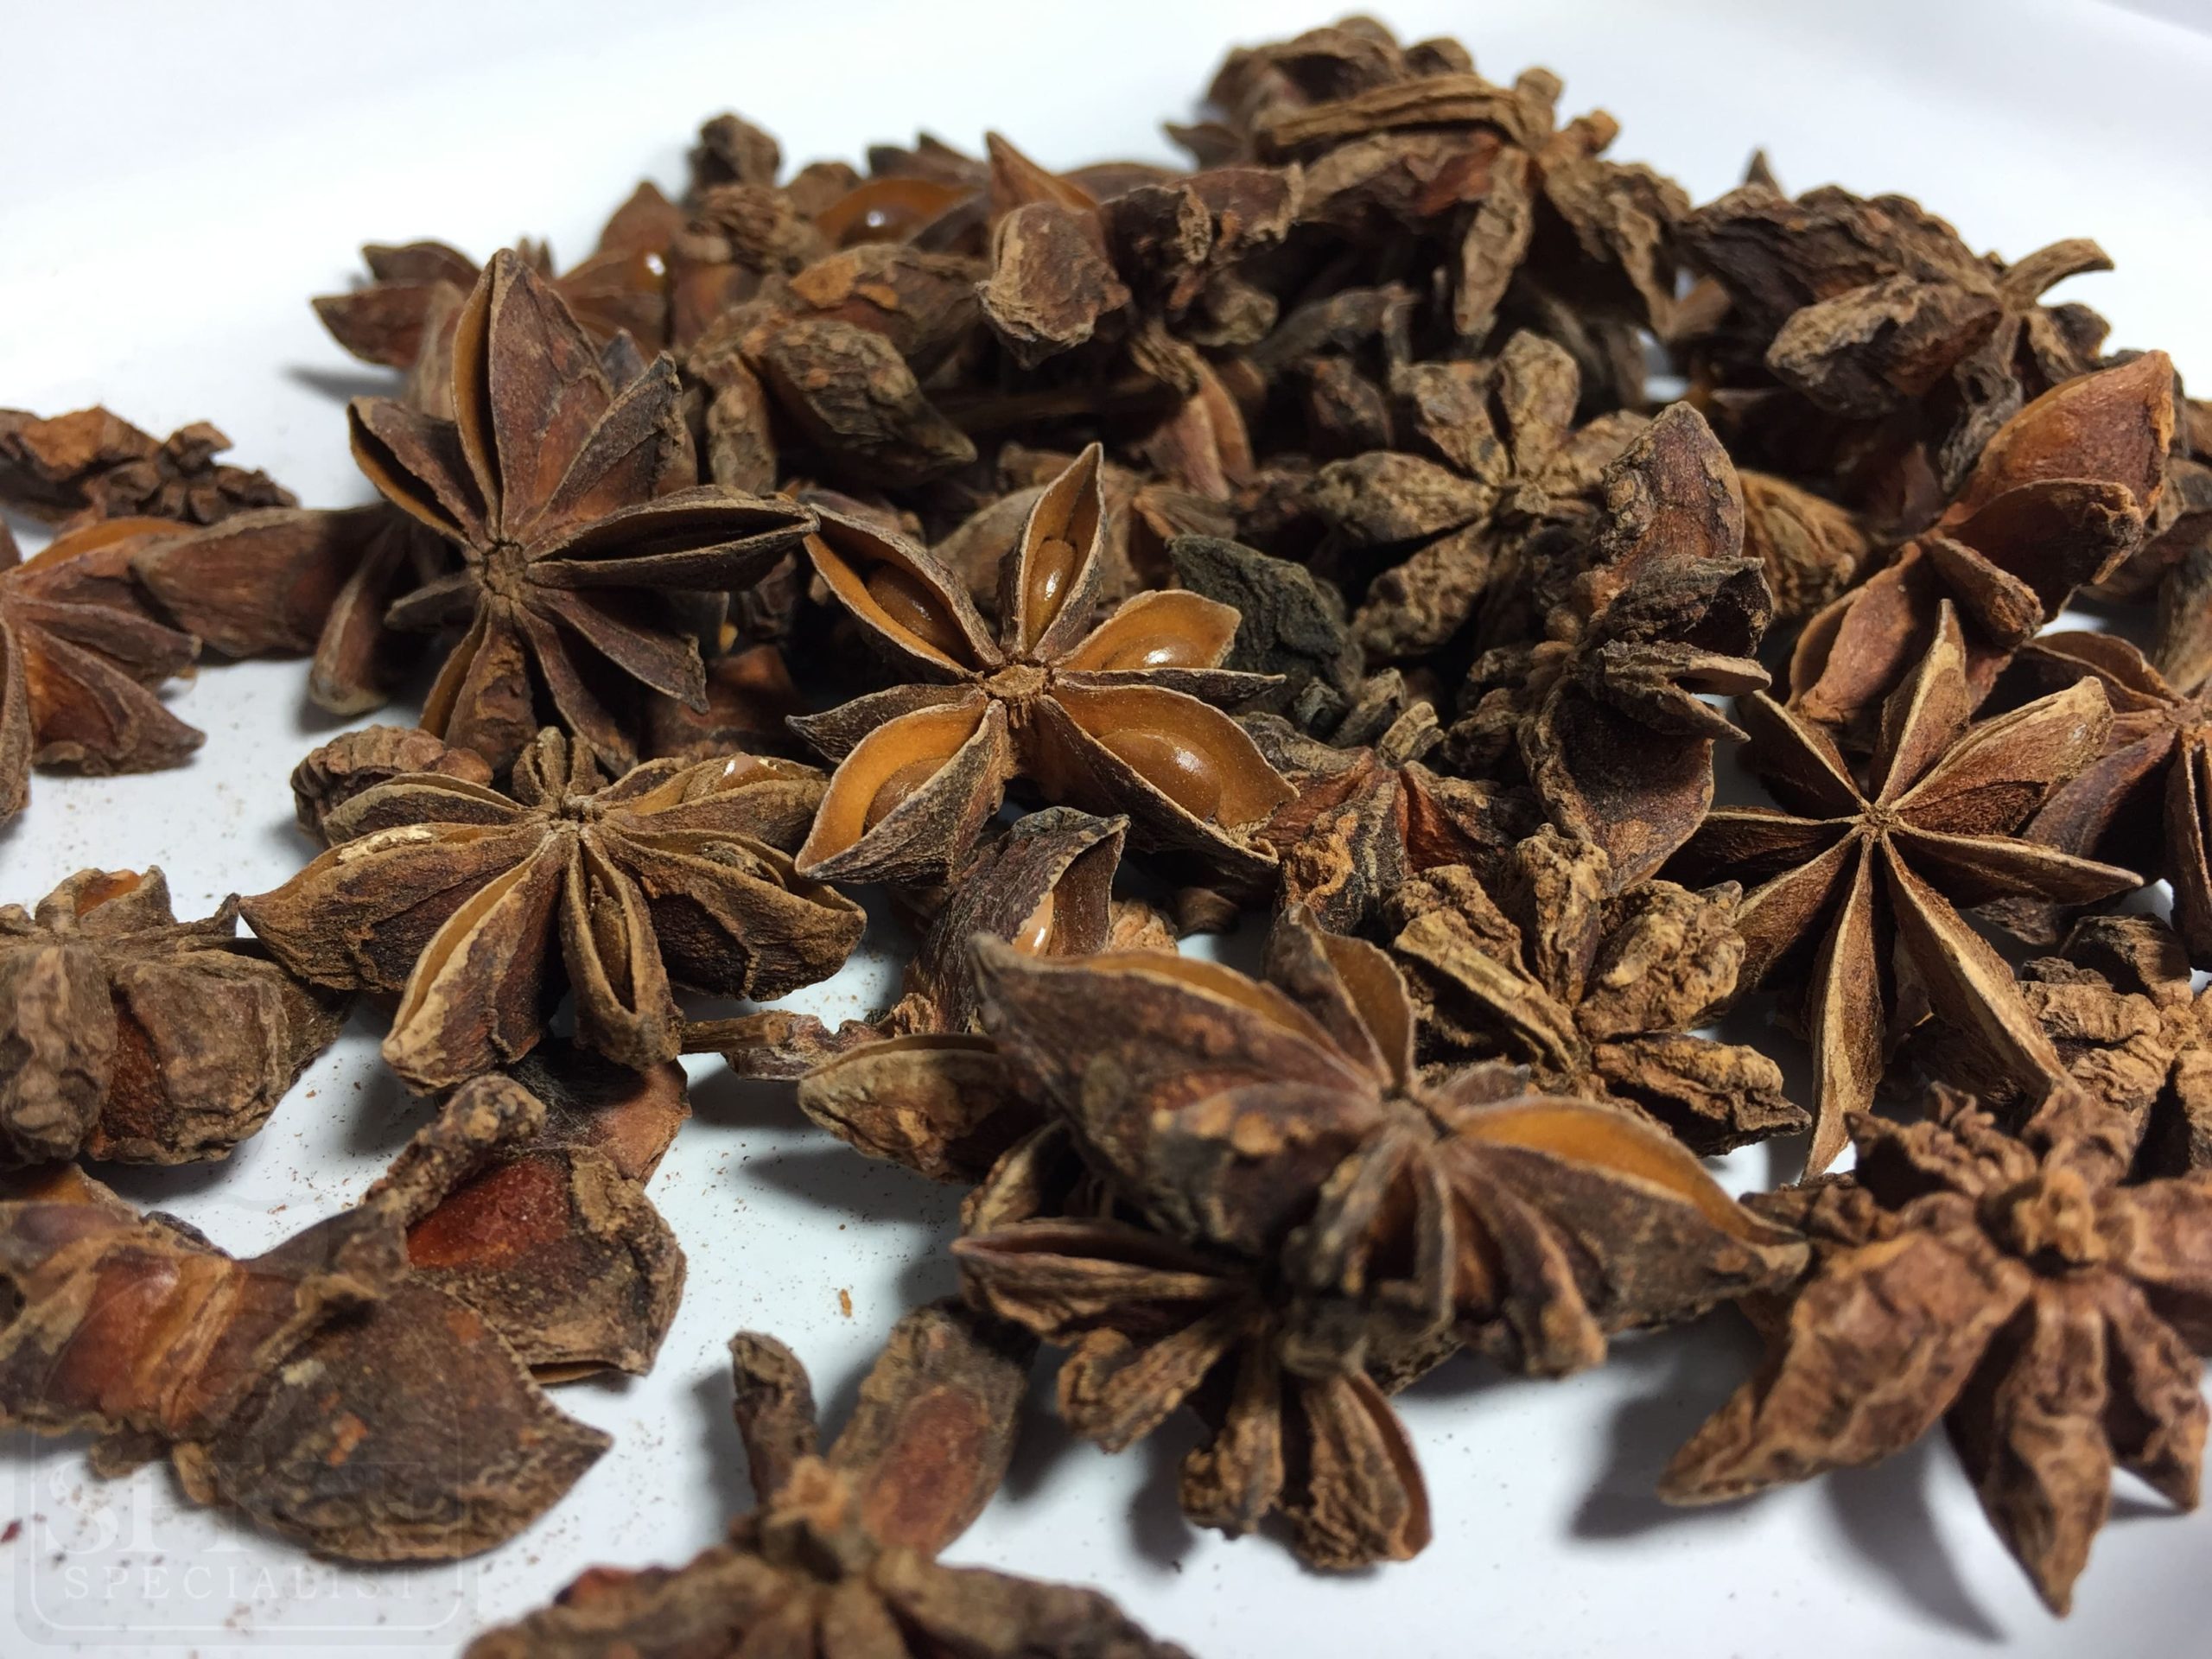 star anise pods whole spice